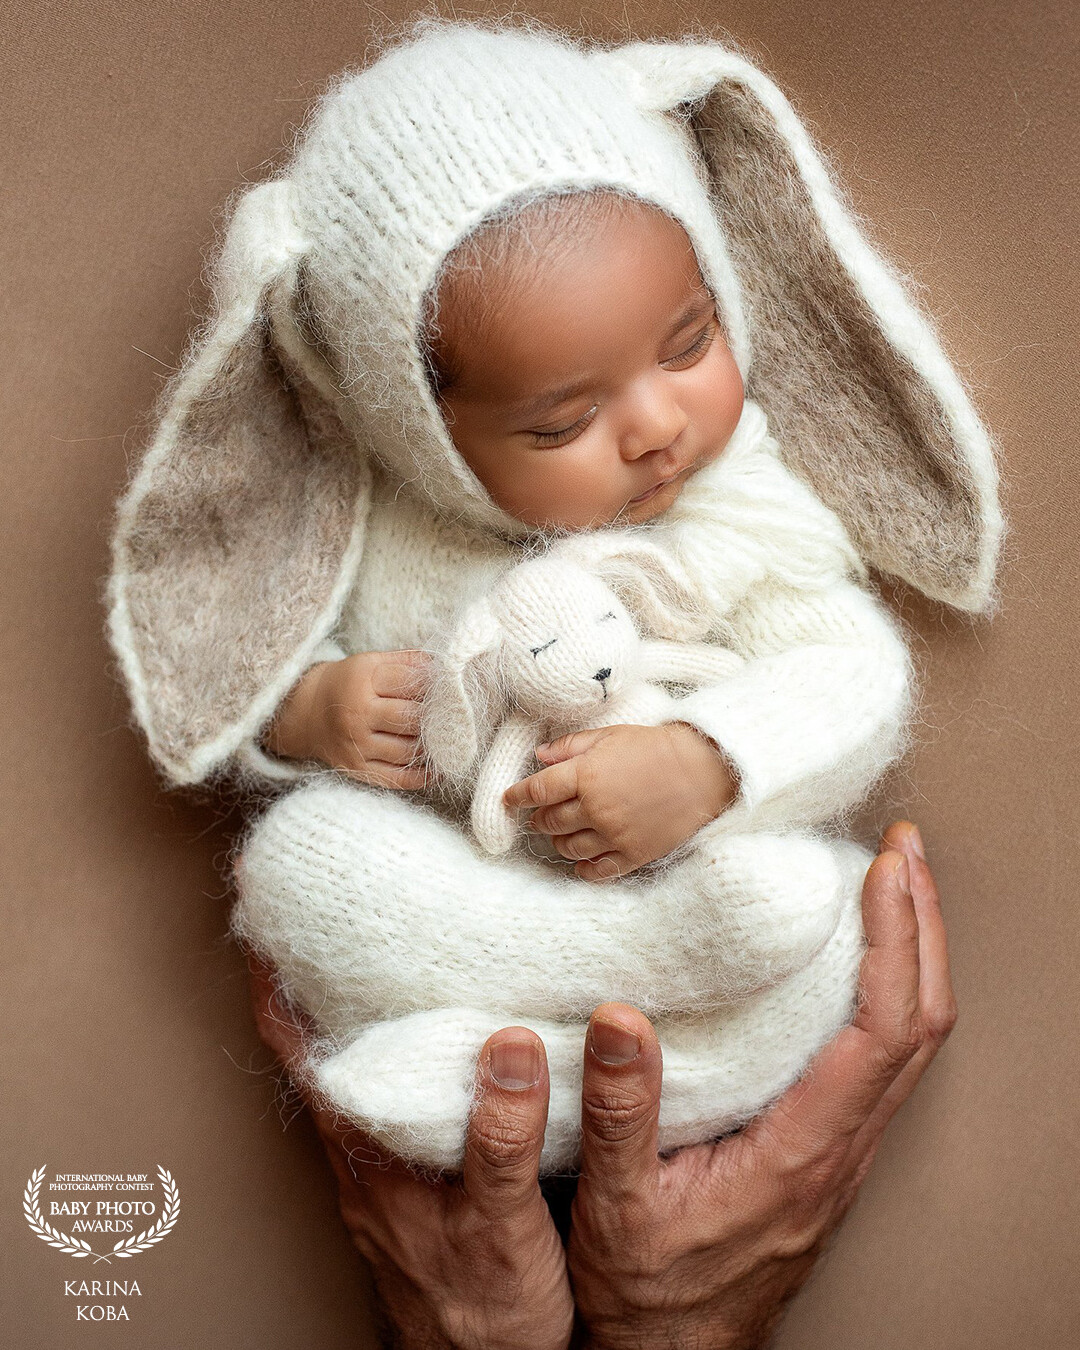 It is so safe in strong daddy's hands... <br />
Frozen unforgettable memories, the cutest moments captured - all this is about a newborn sessions for babies.<br />
I enjoy every single session, every single baby I work with - my work is a happiness itself.